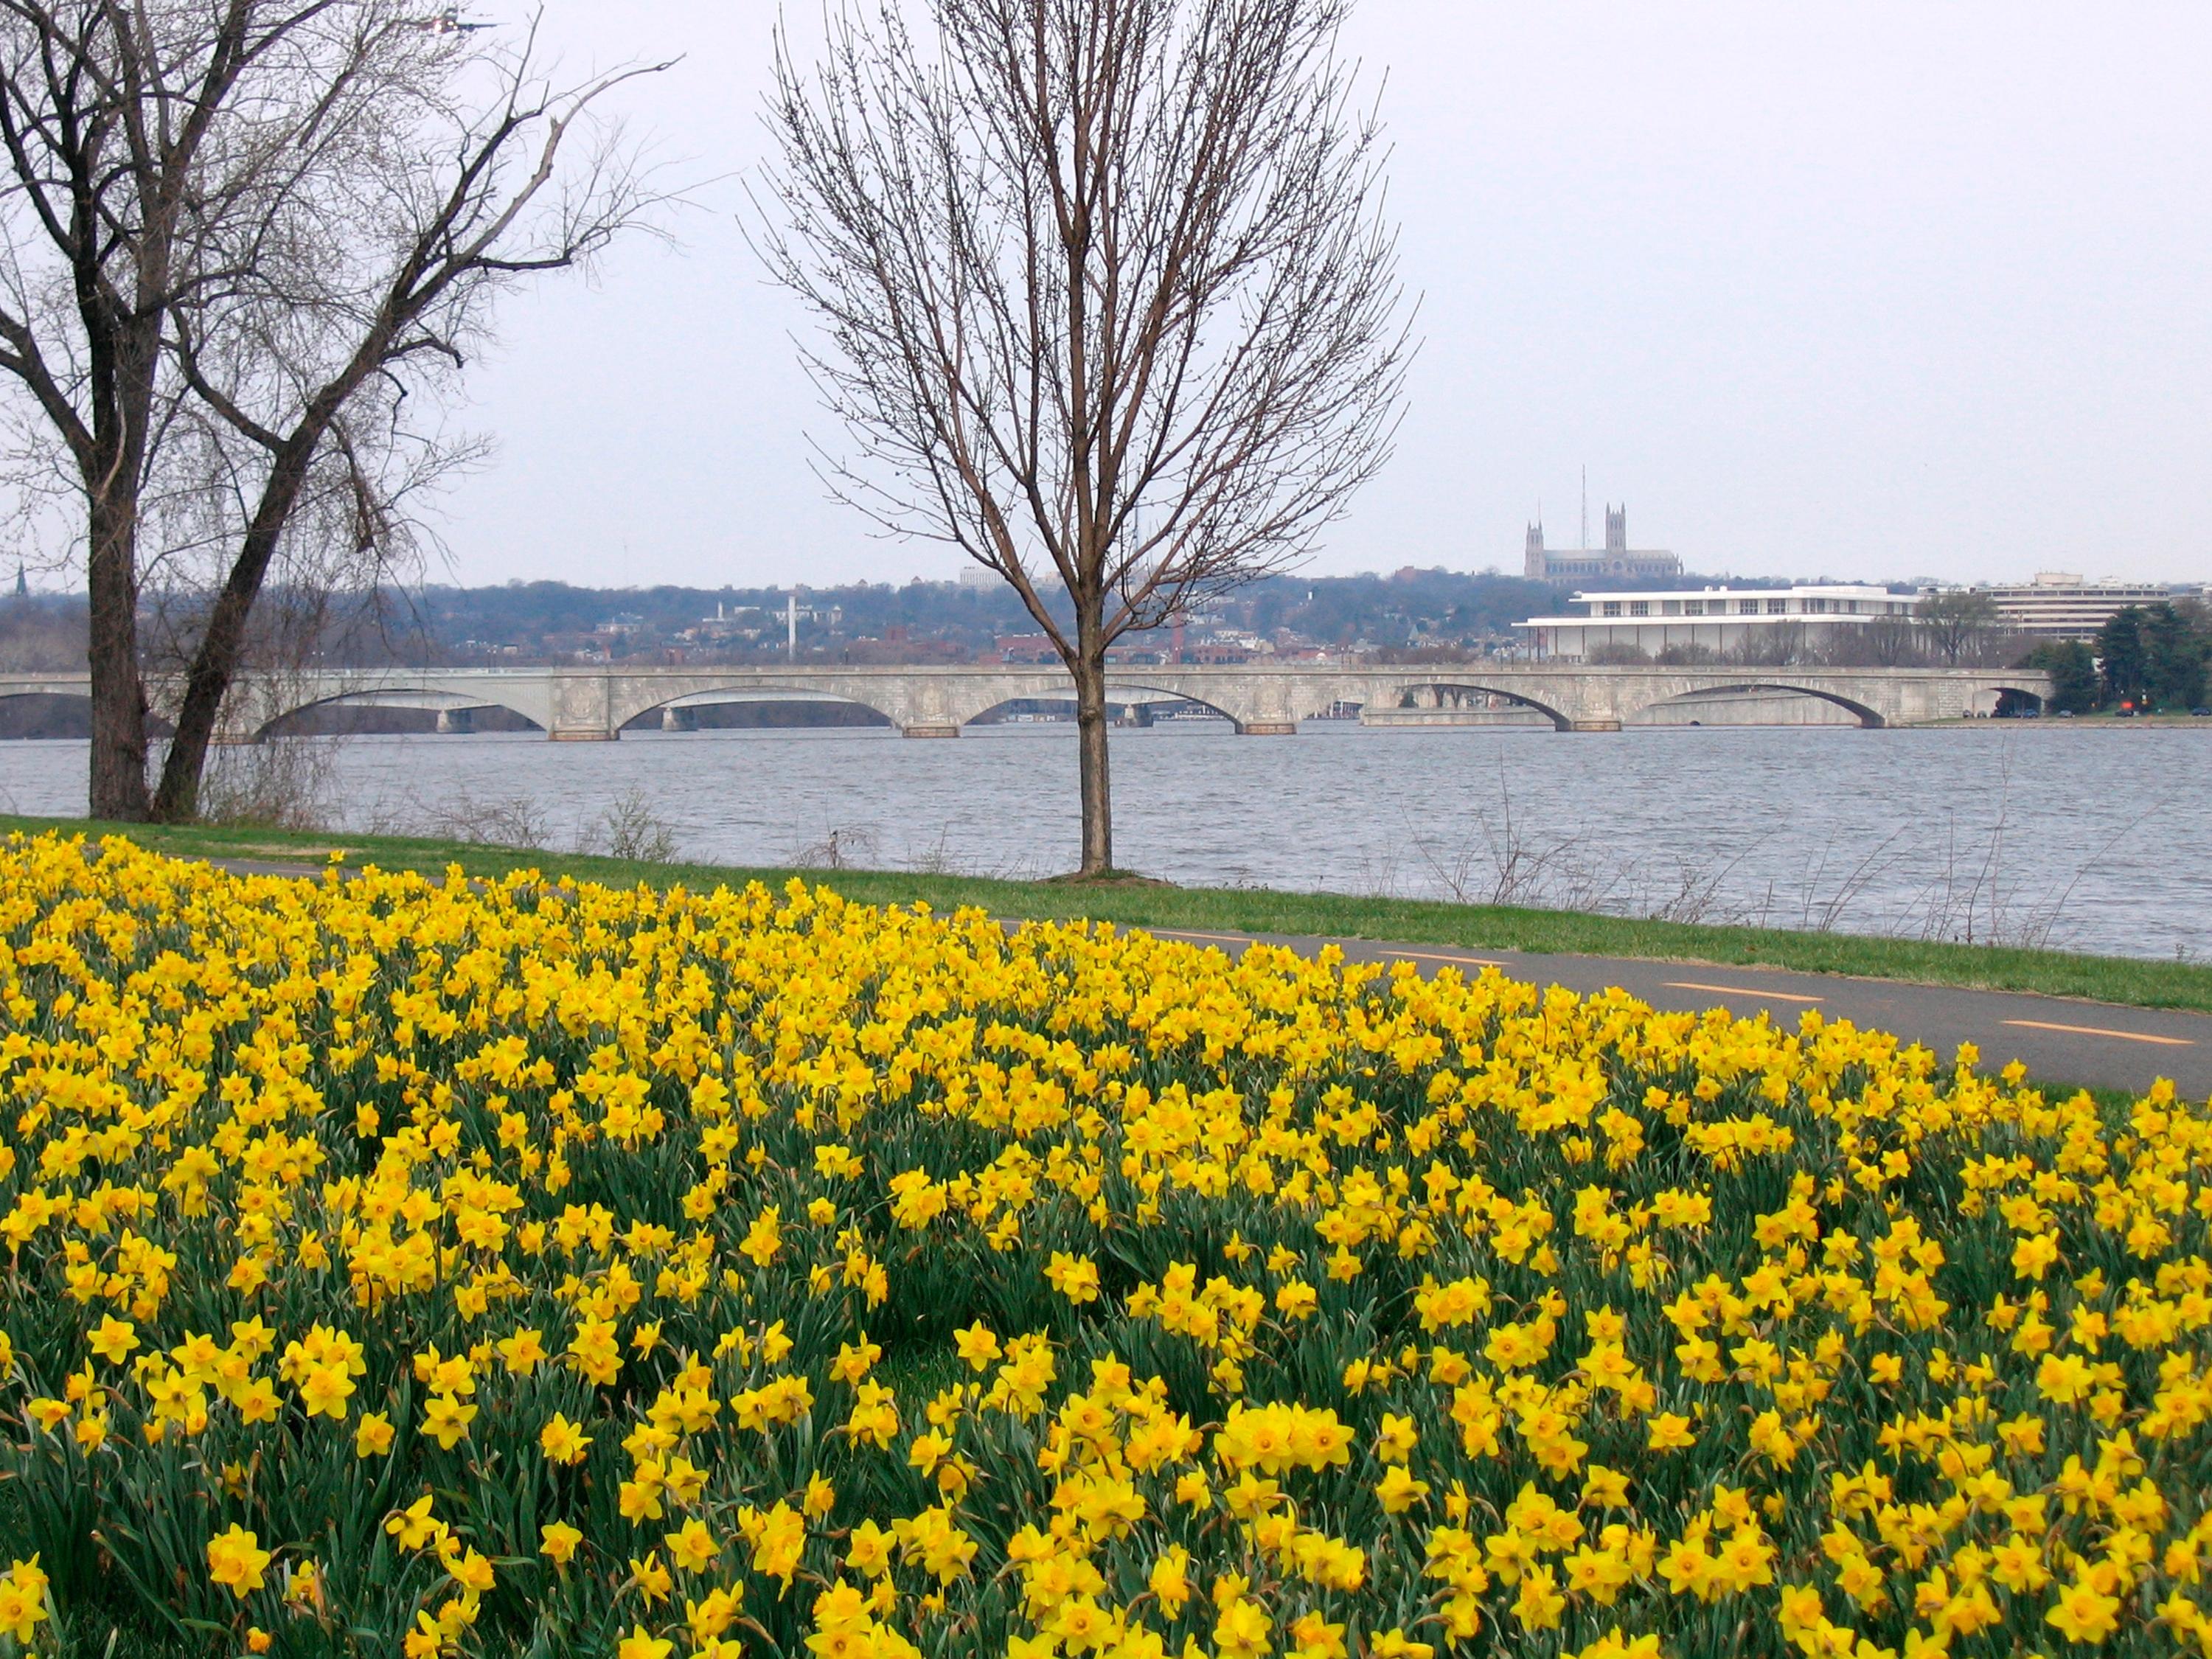 View from the the LBJ memorial of numerous daffodils and the Potomac River.